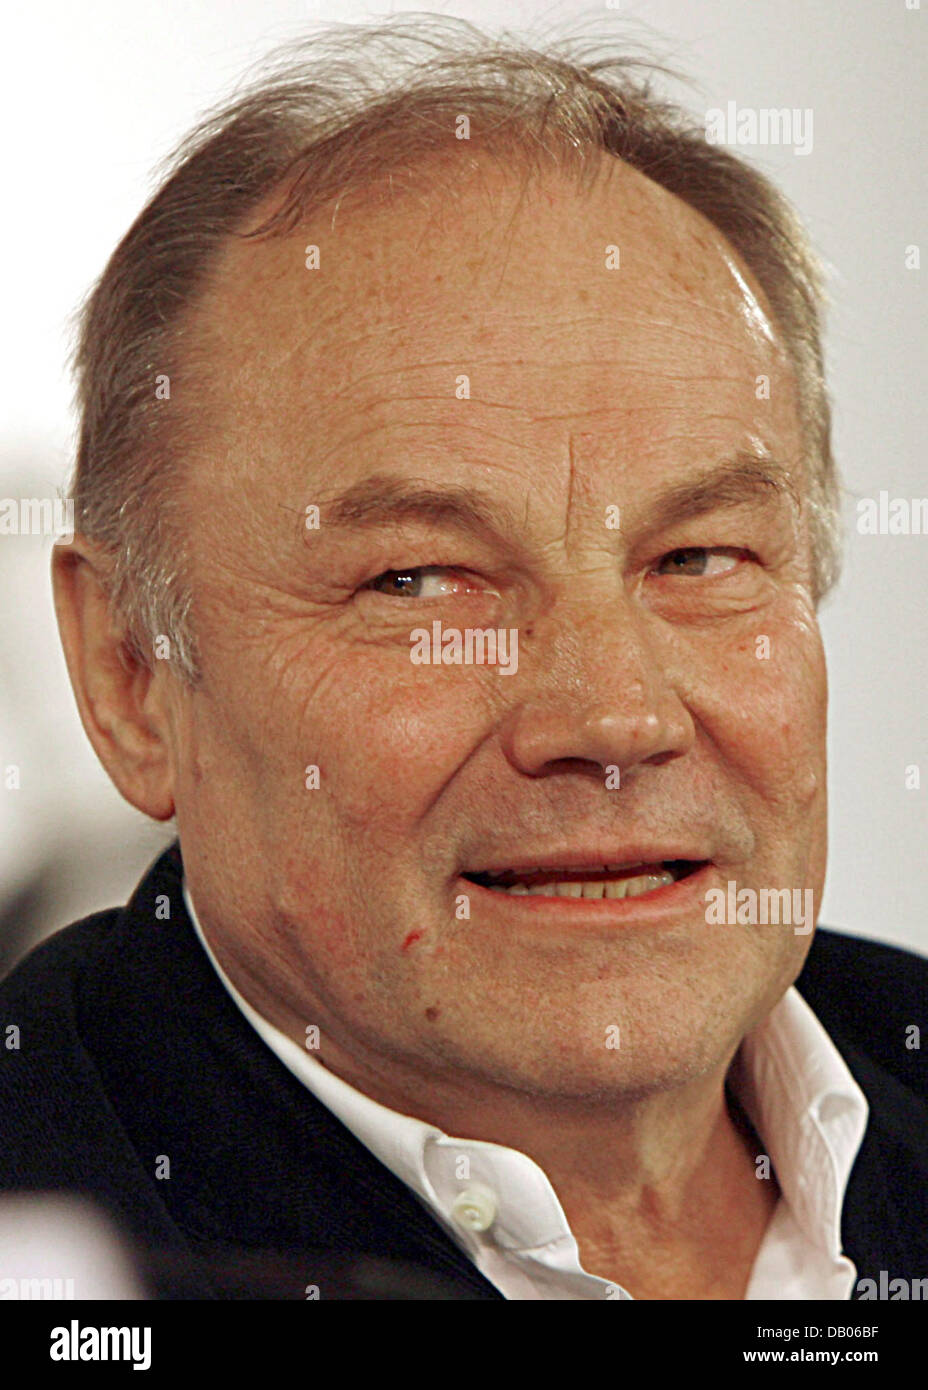 (dpa file) - Austrian actor Klaus Maria Brandauer is pictured in Berlin, Germany, 21 March 2006. The web portal 'Bunte.T-Online' reported that Brandauer married his partner Natalie Krenn at 'Saint Nicholas Church' (Nikolaikirche) in Berlin, Germany, 06 July 2007. The almost hour-long marriage-ceremony was followed by breakfast with family and close friends. Photo: Peer Grimm Stock Photo